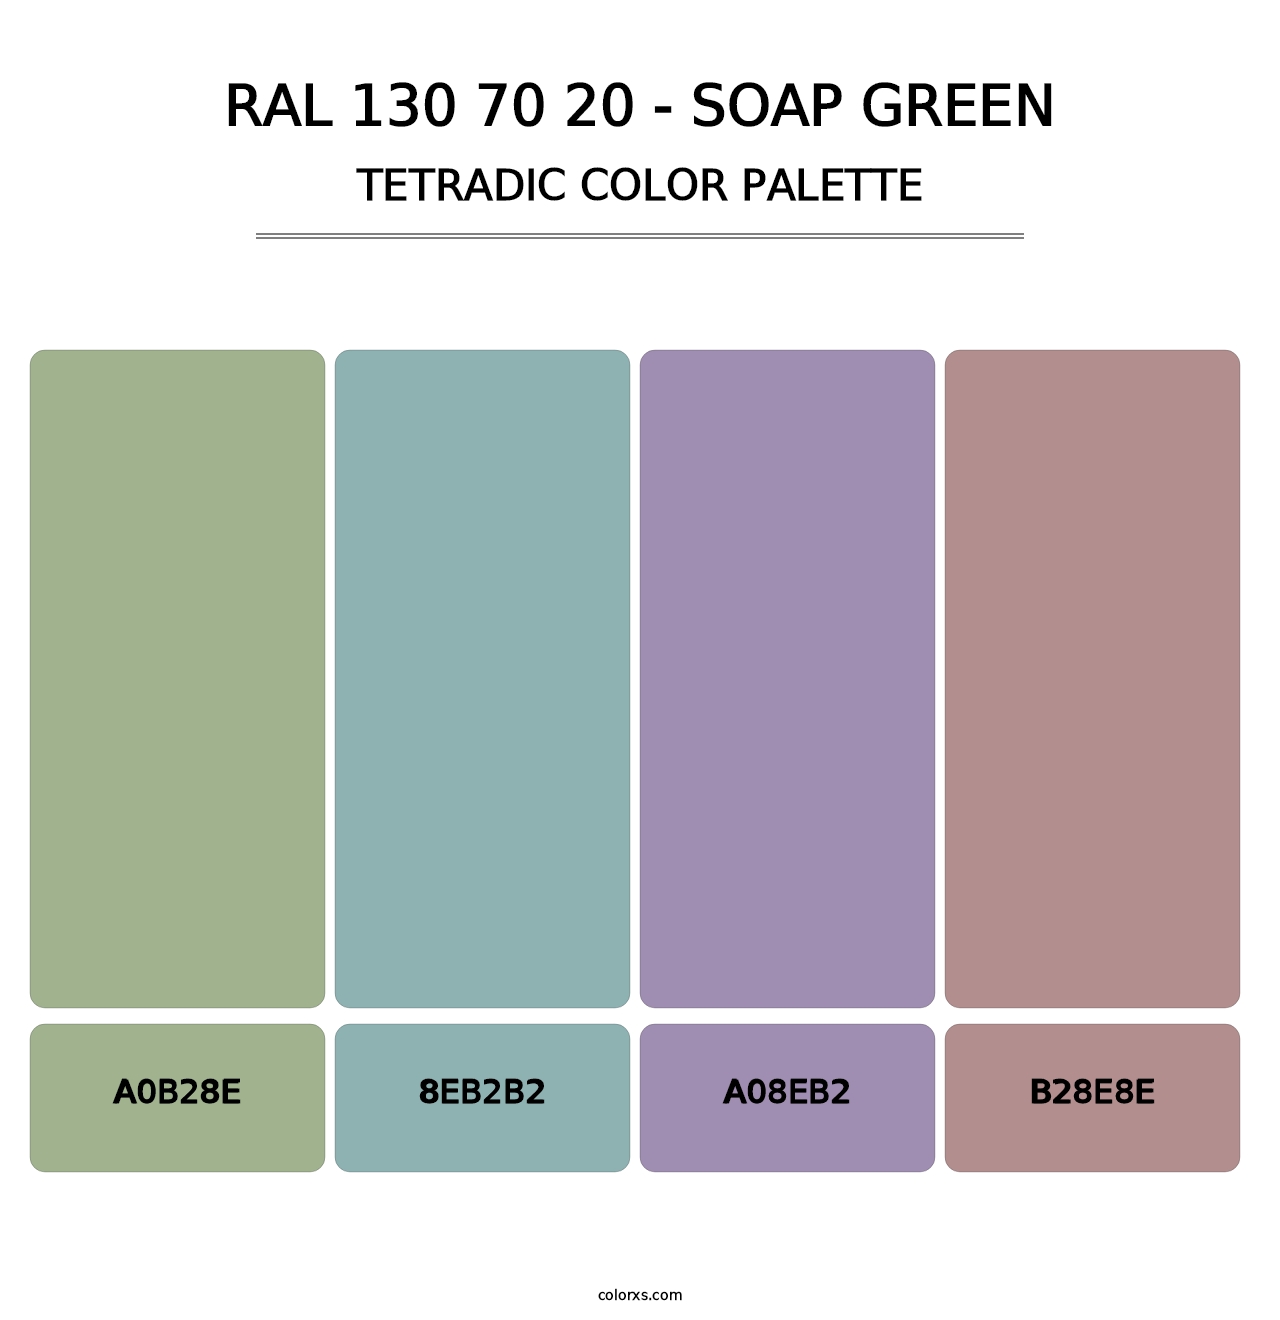 RAL 130 70 20 - Soap Green - Tetradic Color Palette